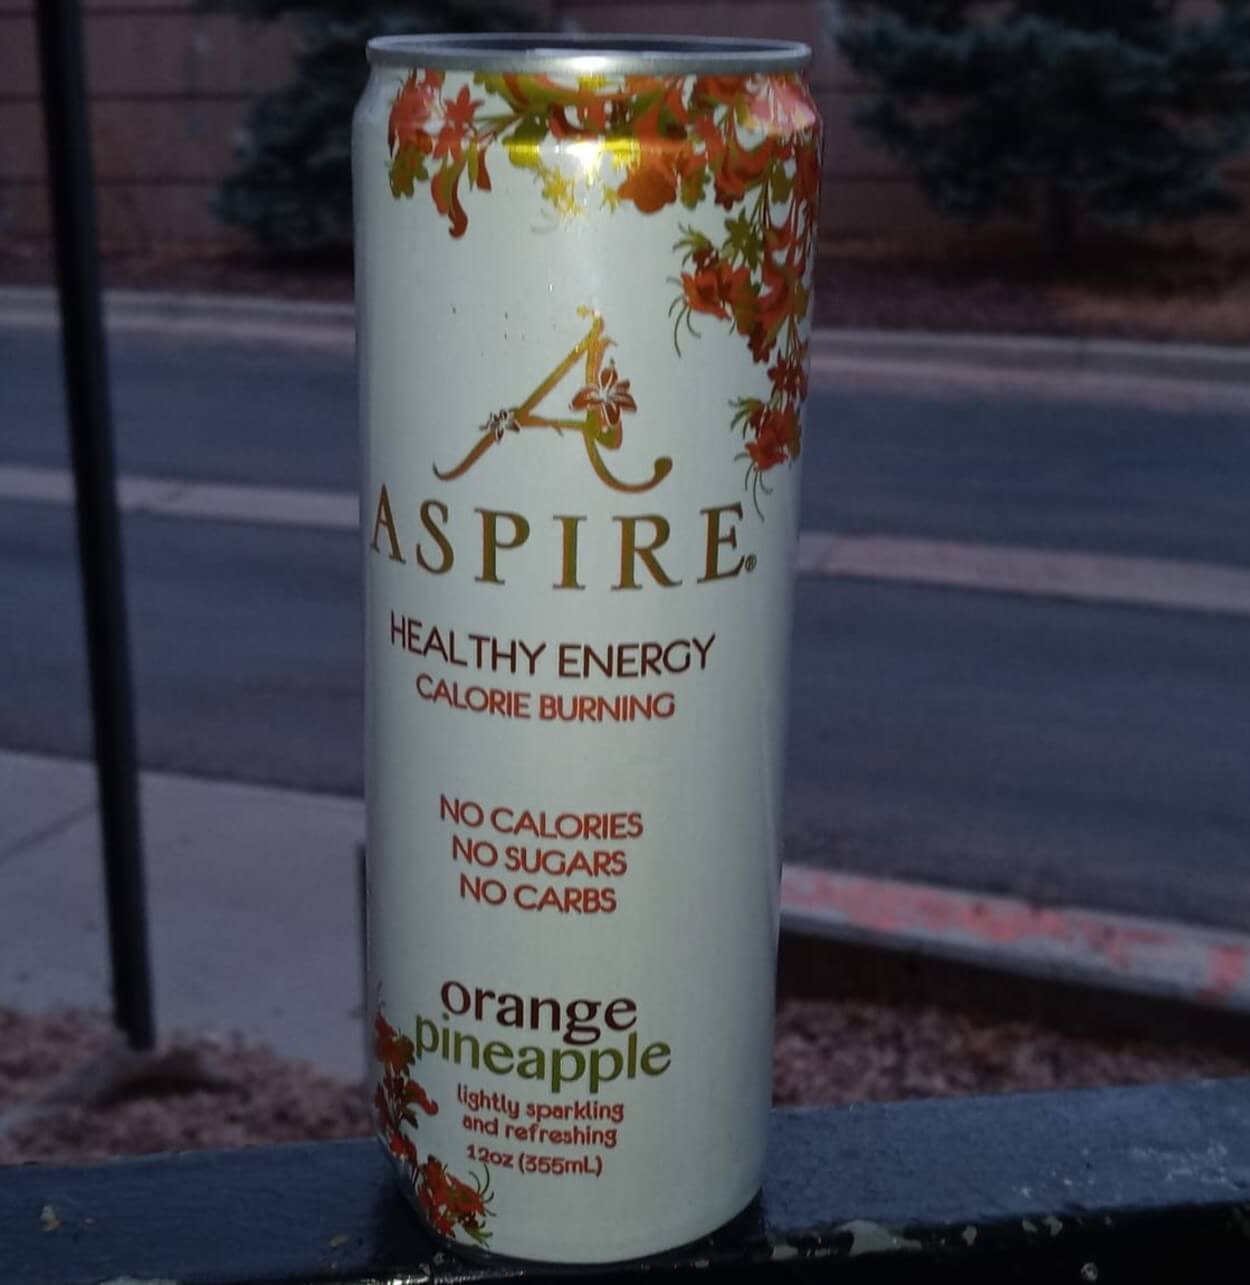 Aspire Energy Drink Caffeine and Ingredients (Guide)